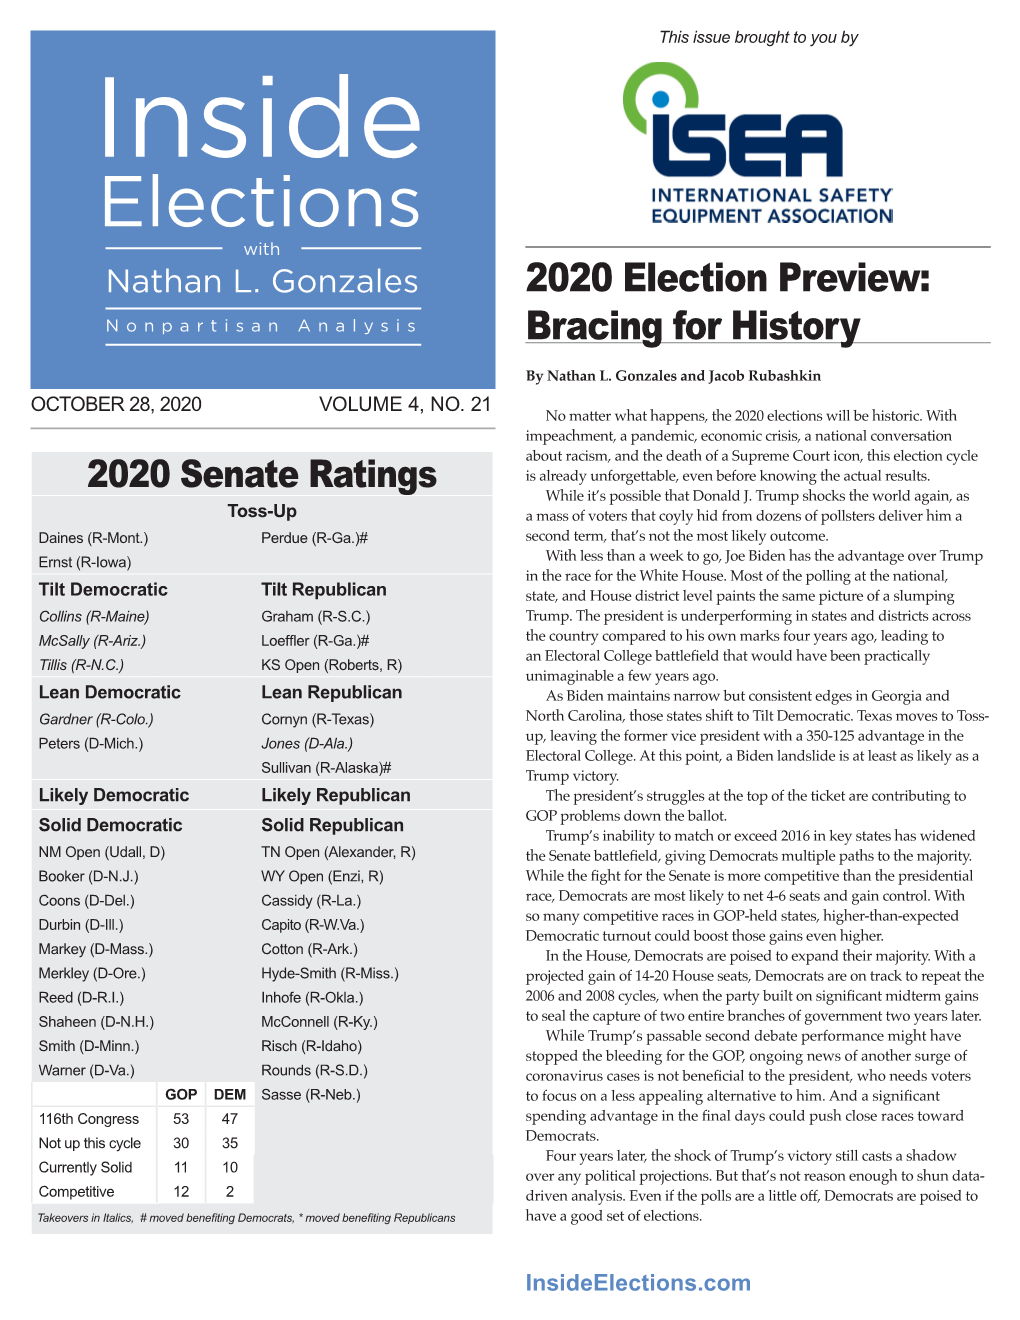 2020 Election Preview: Bracing for History